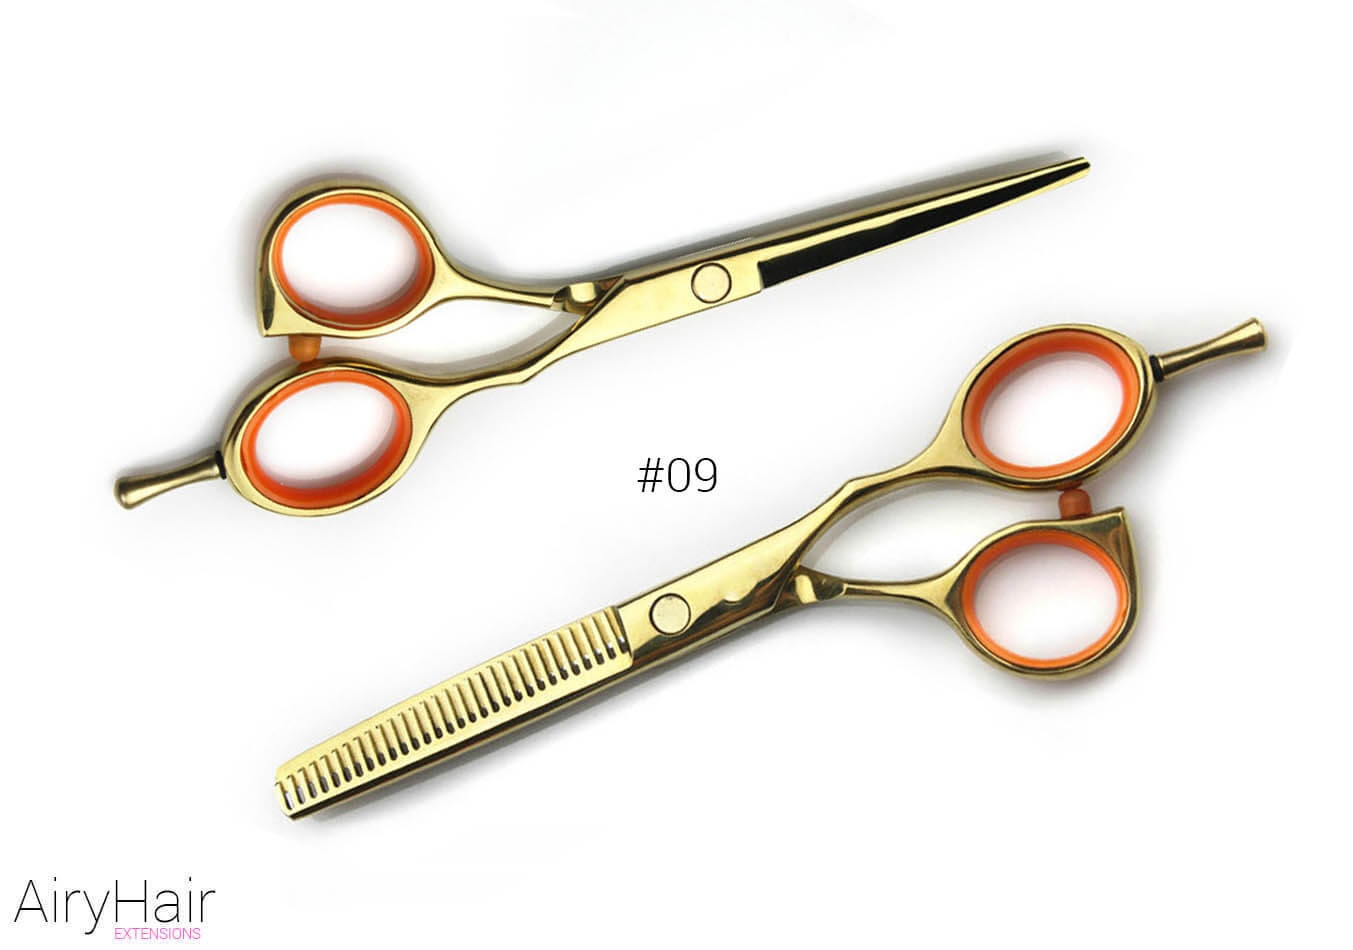 Prefect Cutting Ladies Short Hair With Thinning Scissors for Curly Hair